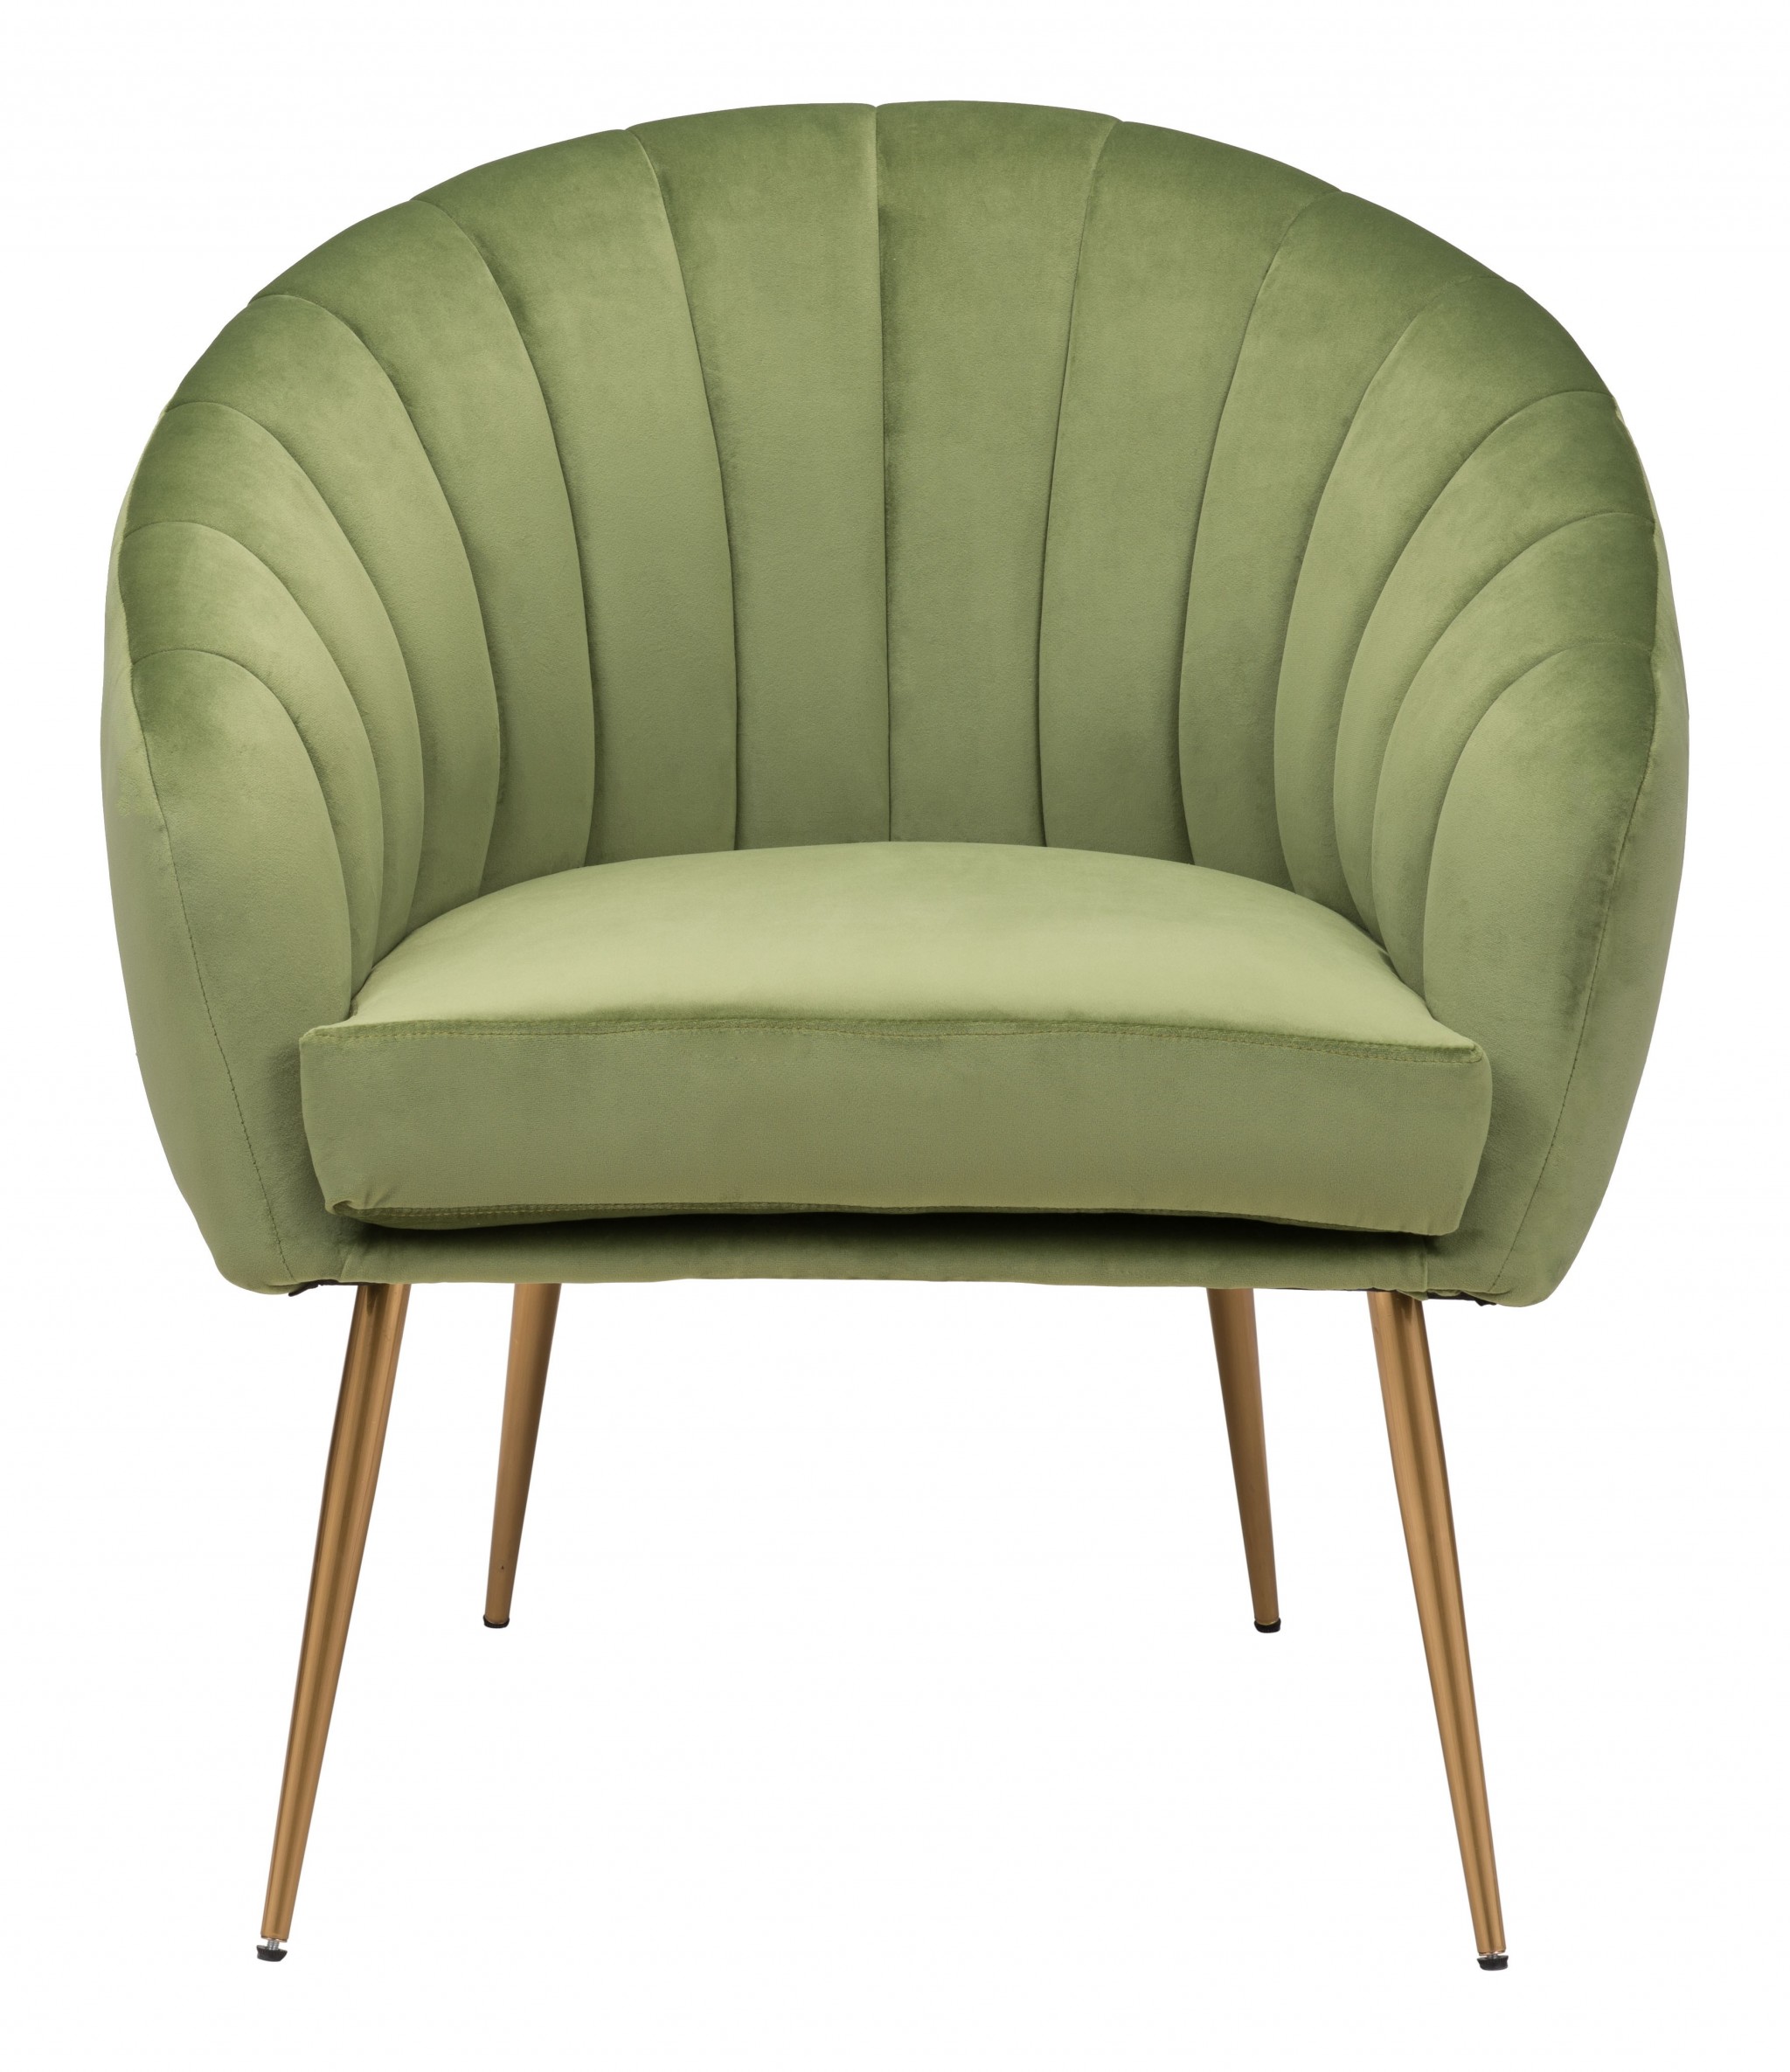 Mossy Green and Gold Curve Vertical Channel Accent Club Chair